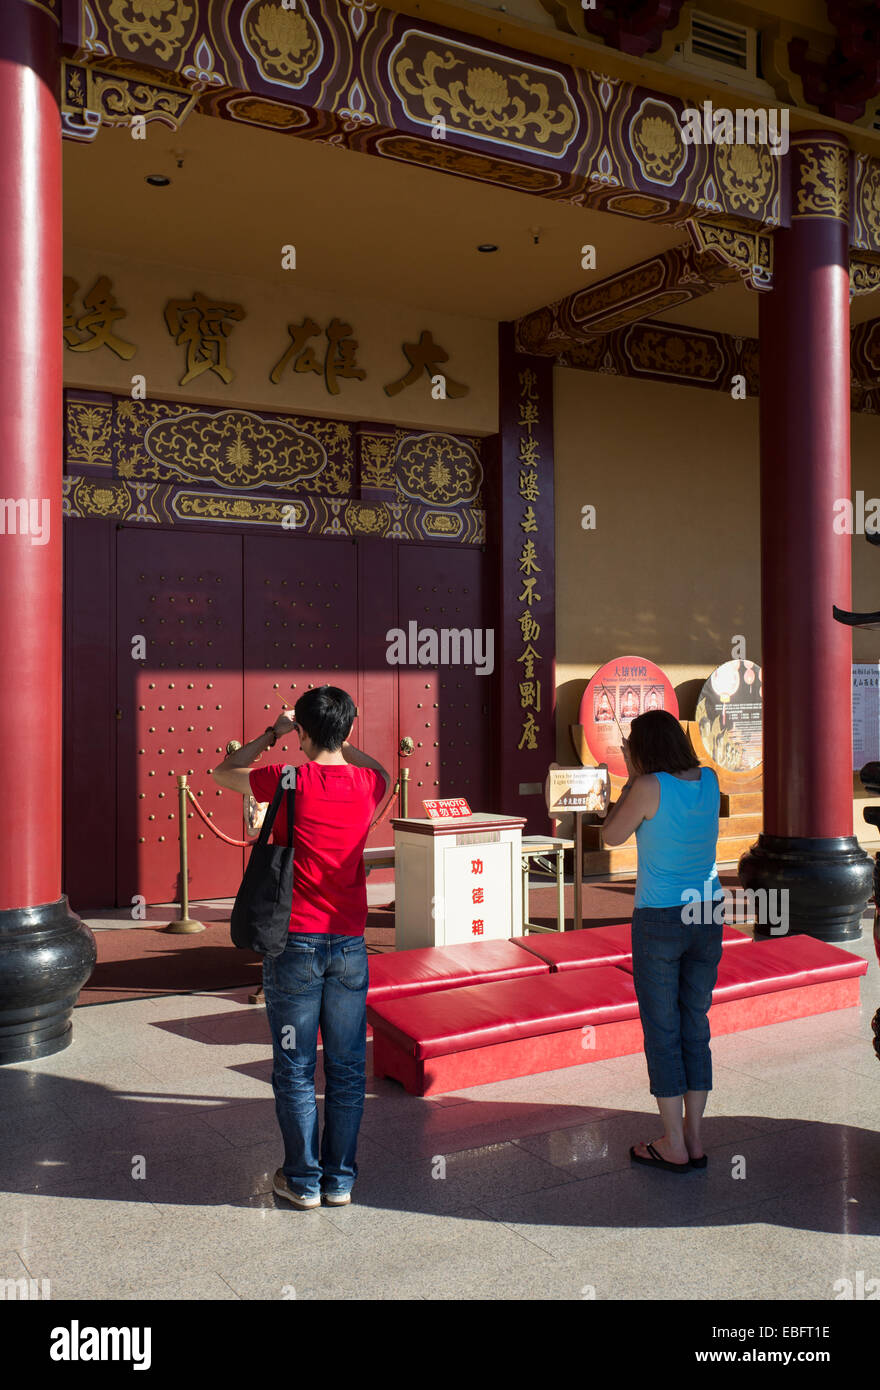 people, adult woman, adult, woman, at prayer, praying, entrance, Main Hall, Hsi Lai Temple, city of Hacienda Heights, Los Angeles County, California Stock Photo